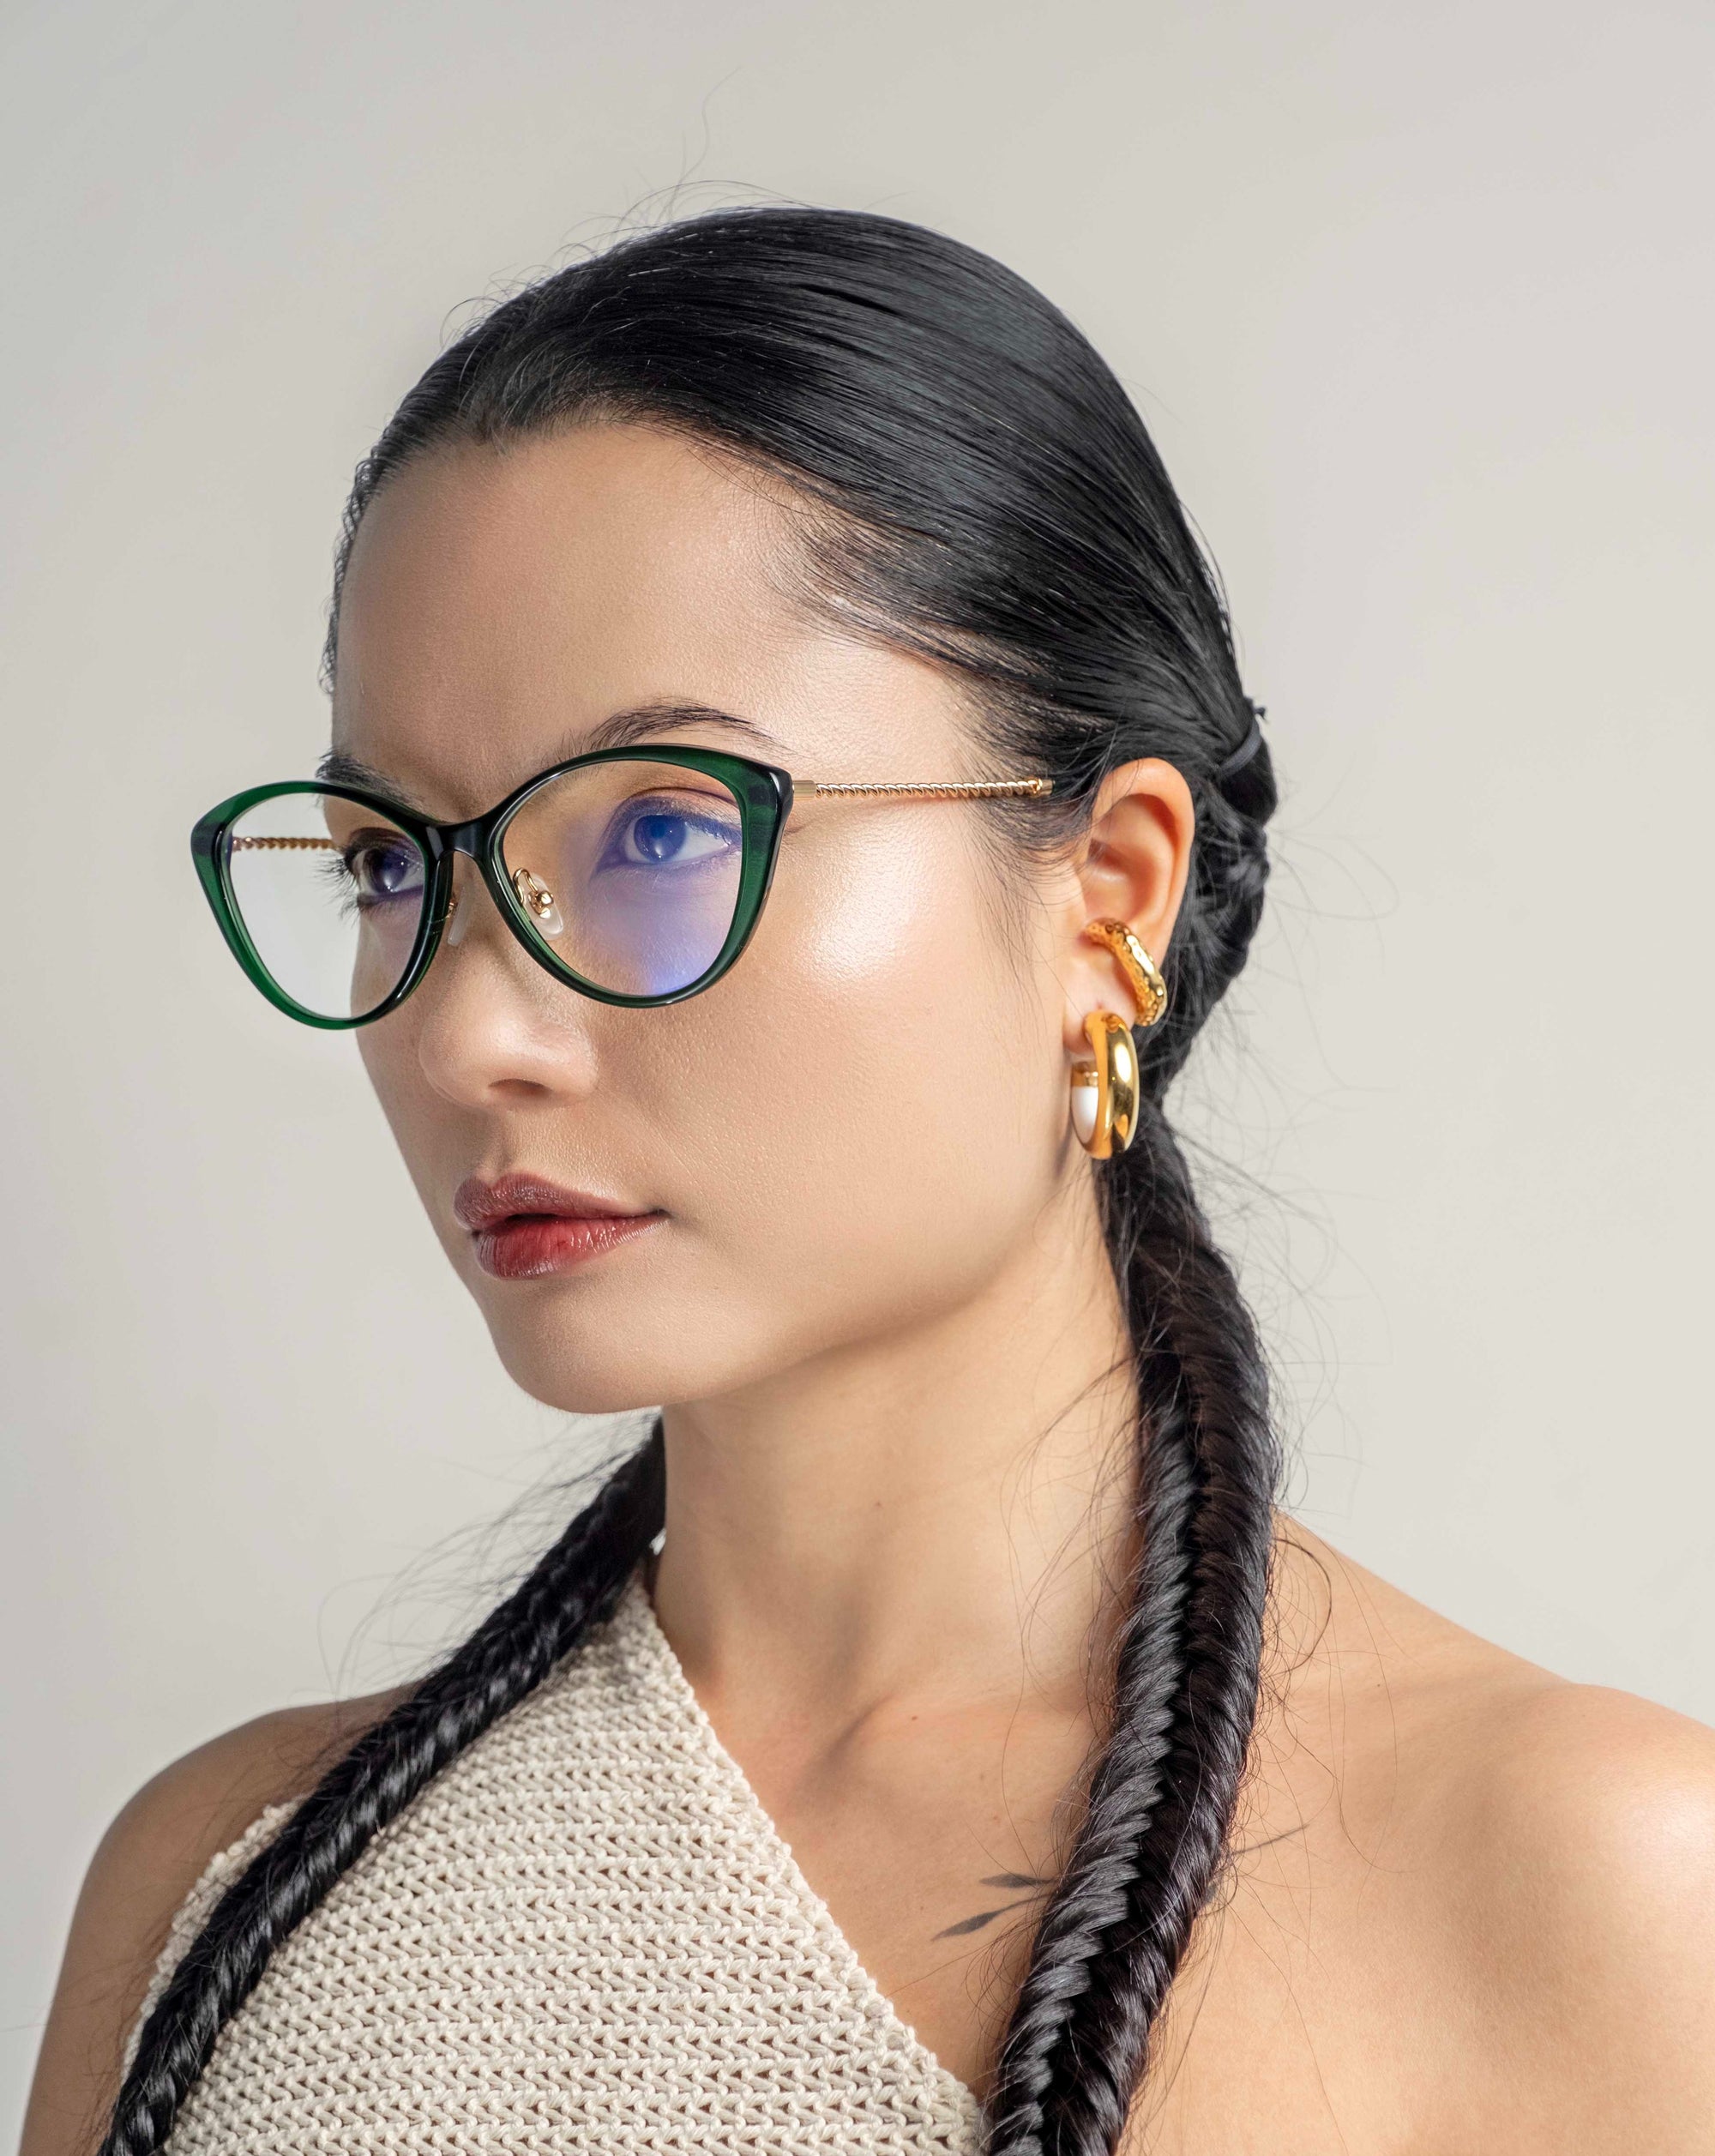 A woman with long, dark hair styled in a braided ponytail wears black cat-eye Perla II glasses by For Art&#39;s Sake® featuring blue-tinted lenses and 18-karat gold plating. She has gold hoop earrings and is dressed in a knitted beige top while standing against a plain light-colored background.